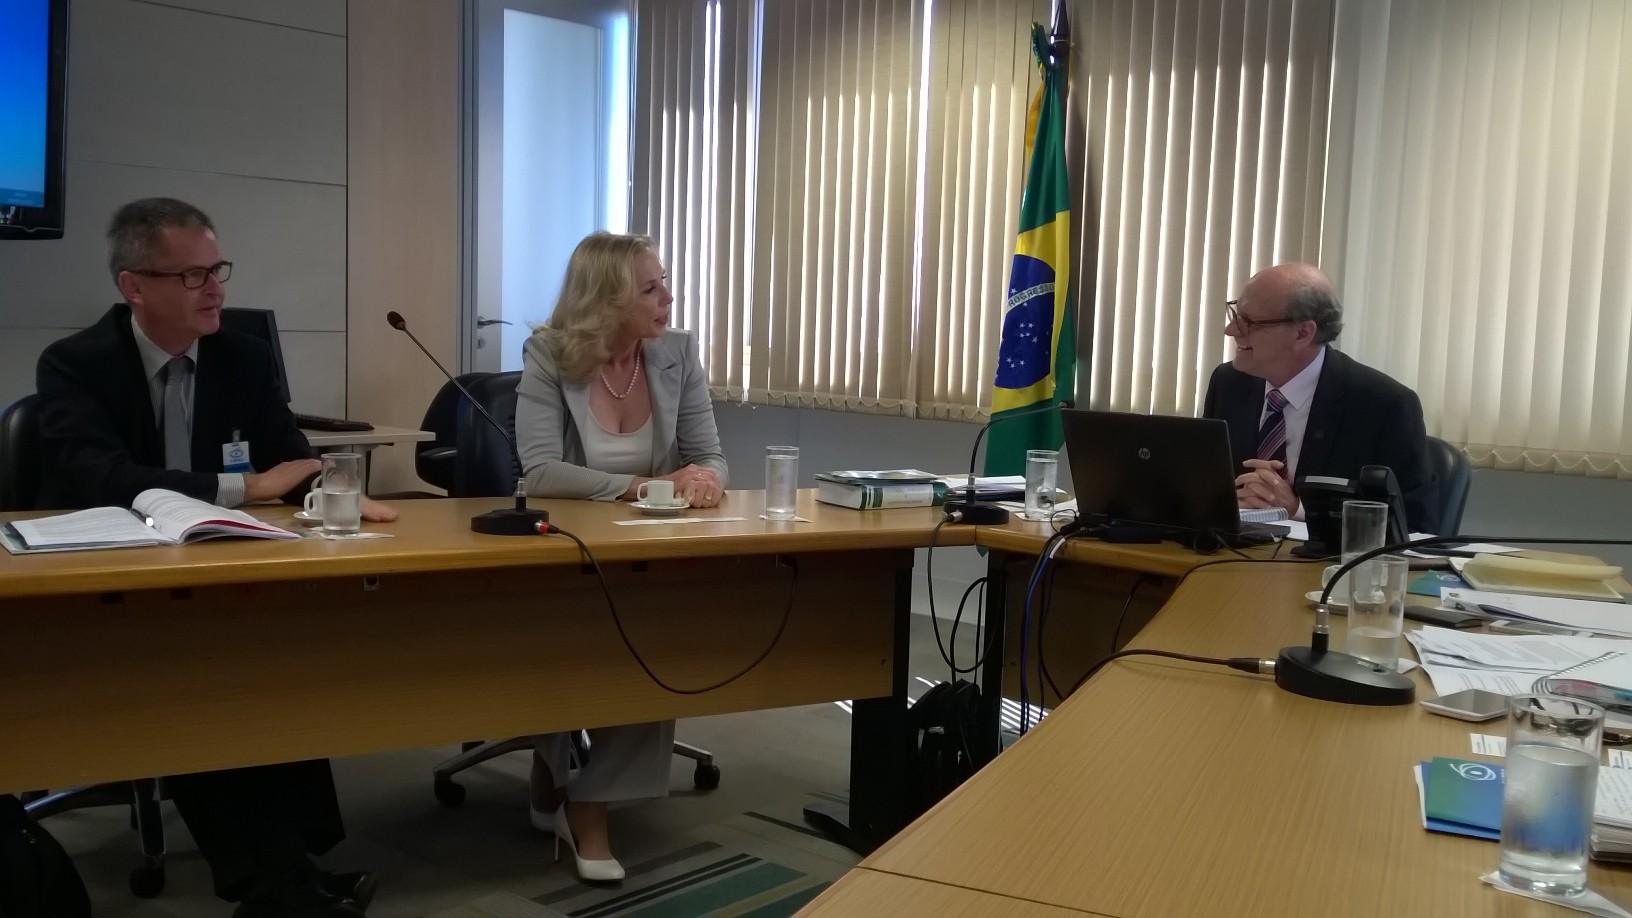 (L to R) Dietrich Halm, Dorothee Dzwonnek and Arlindo Philippi Junior meet with CAPES in Brasilia.